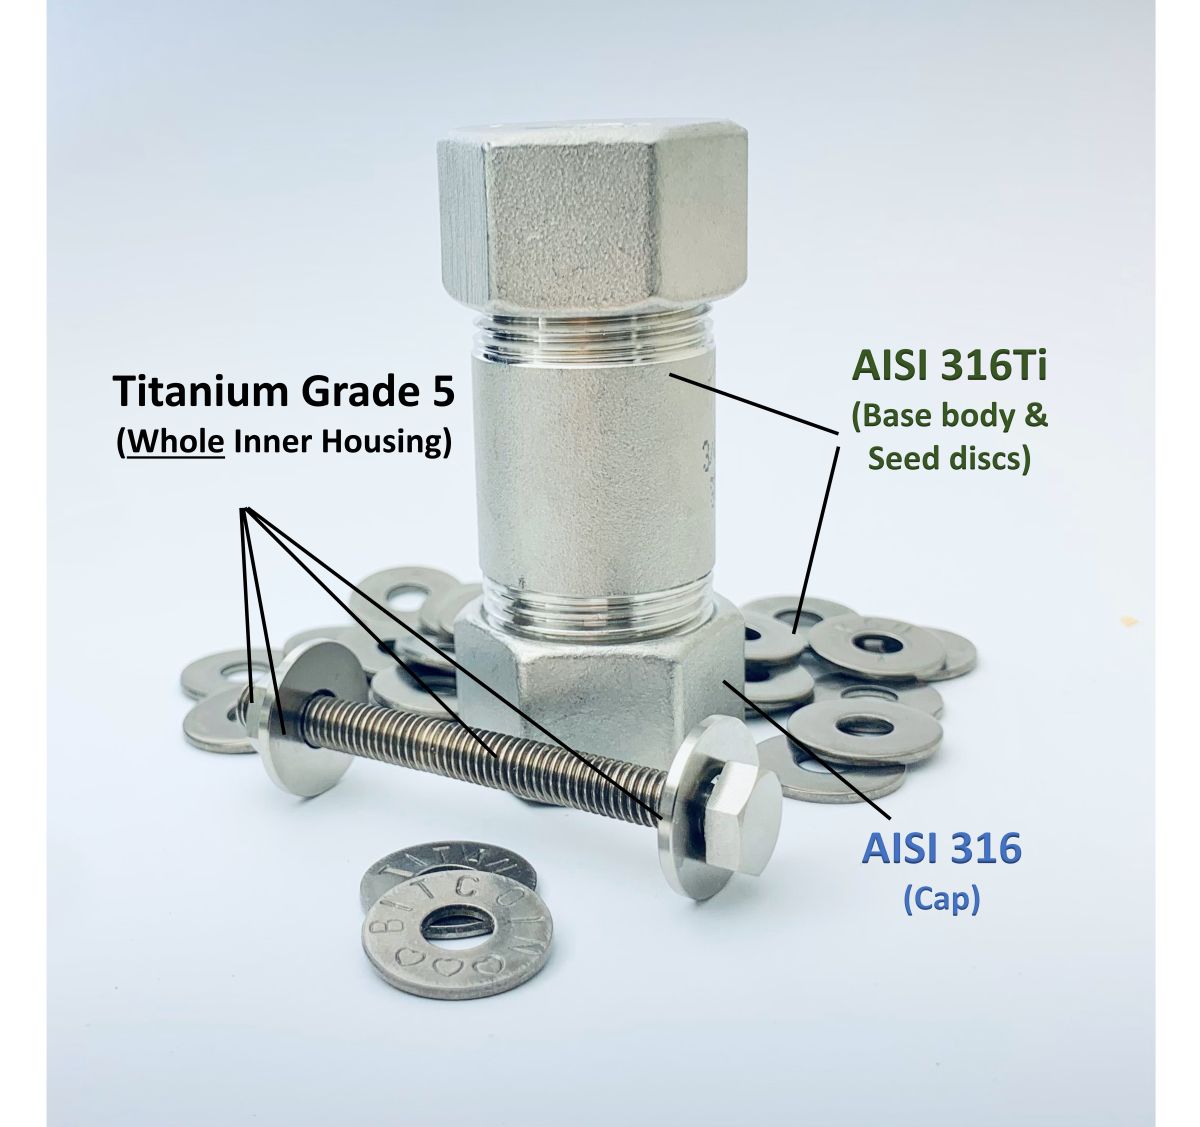 Material illustration of the Titan Wallet - AISI316TI for Base Body and Seed Discs, Titanium Grade 5 for the inner, AISI 316 for the Caps.